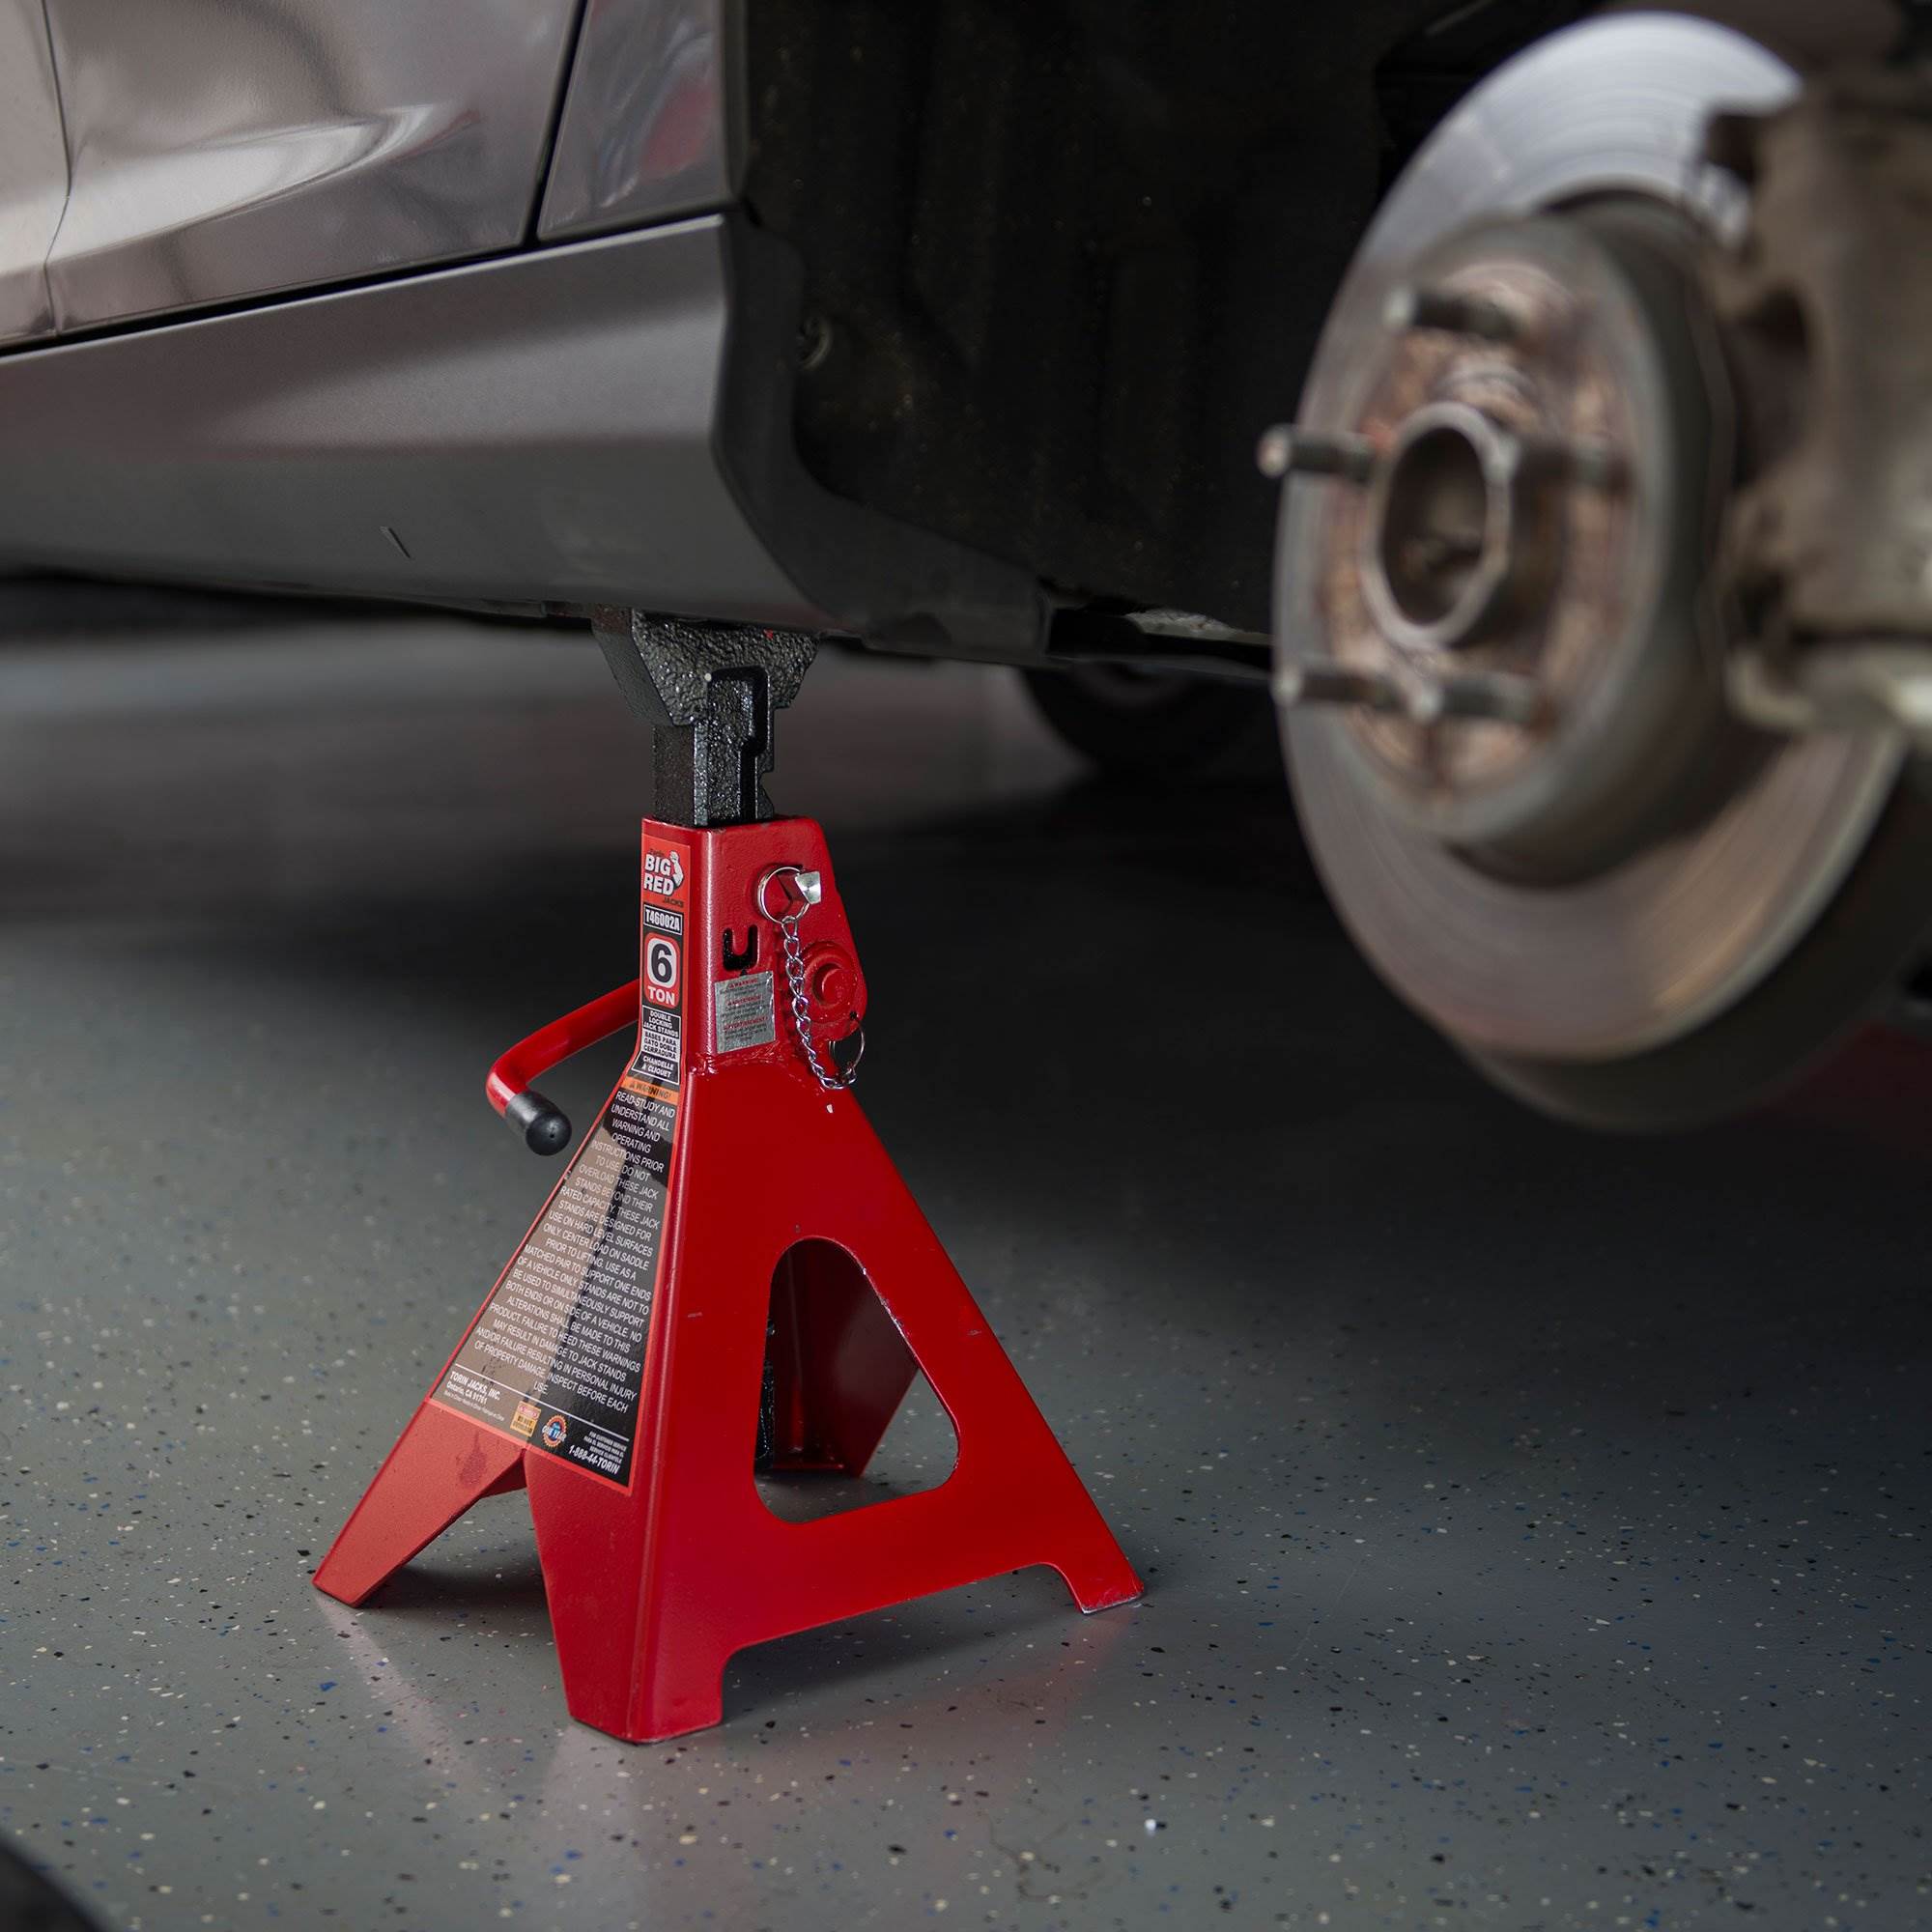 Torin Big Red 6 Ton Capacity Heavy Duty Double Locking Steel Jack Stands, 1 Pair - image 5 of 7